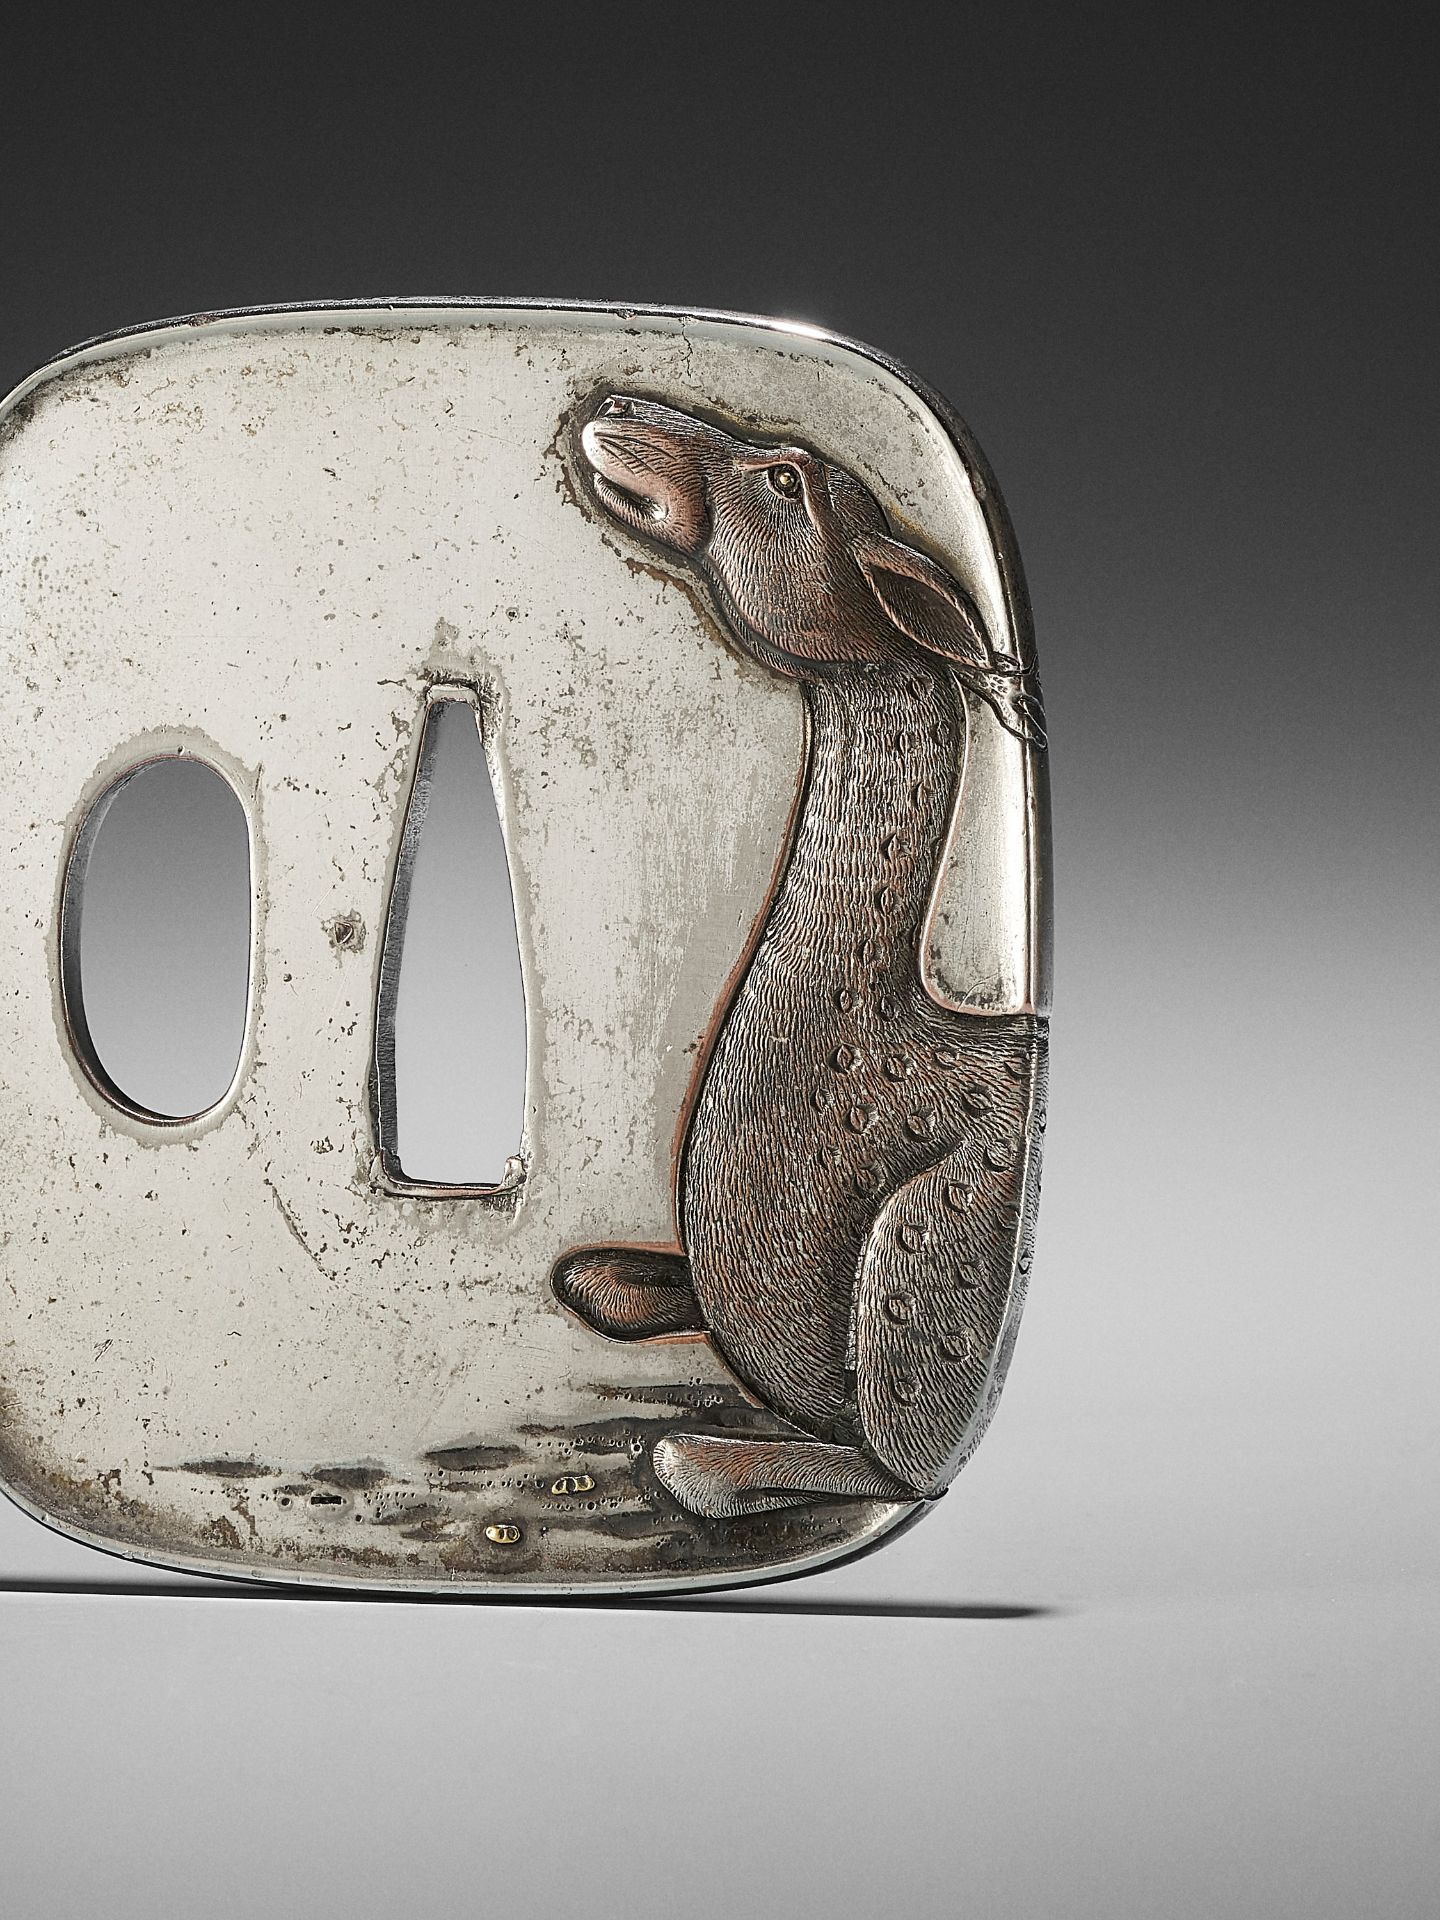 A SILVERED TSUBA WITH A RECUMBENT DEER - Image 4 of 5